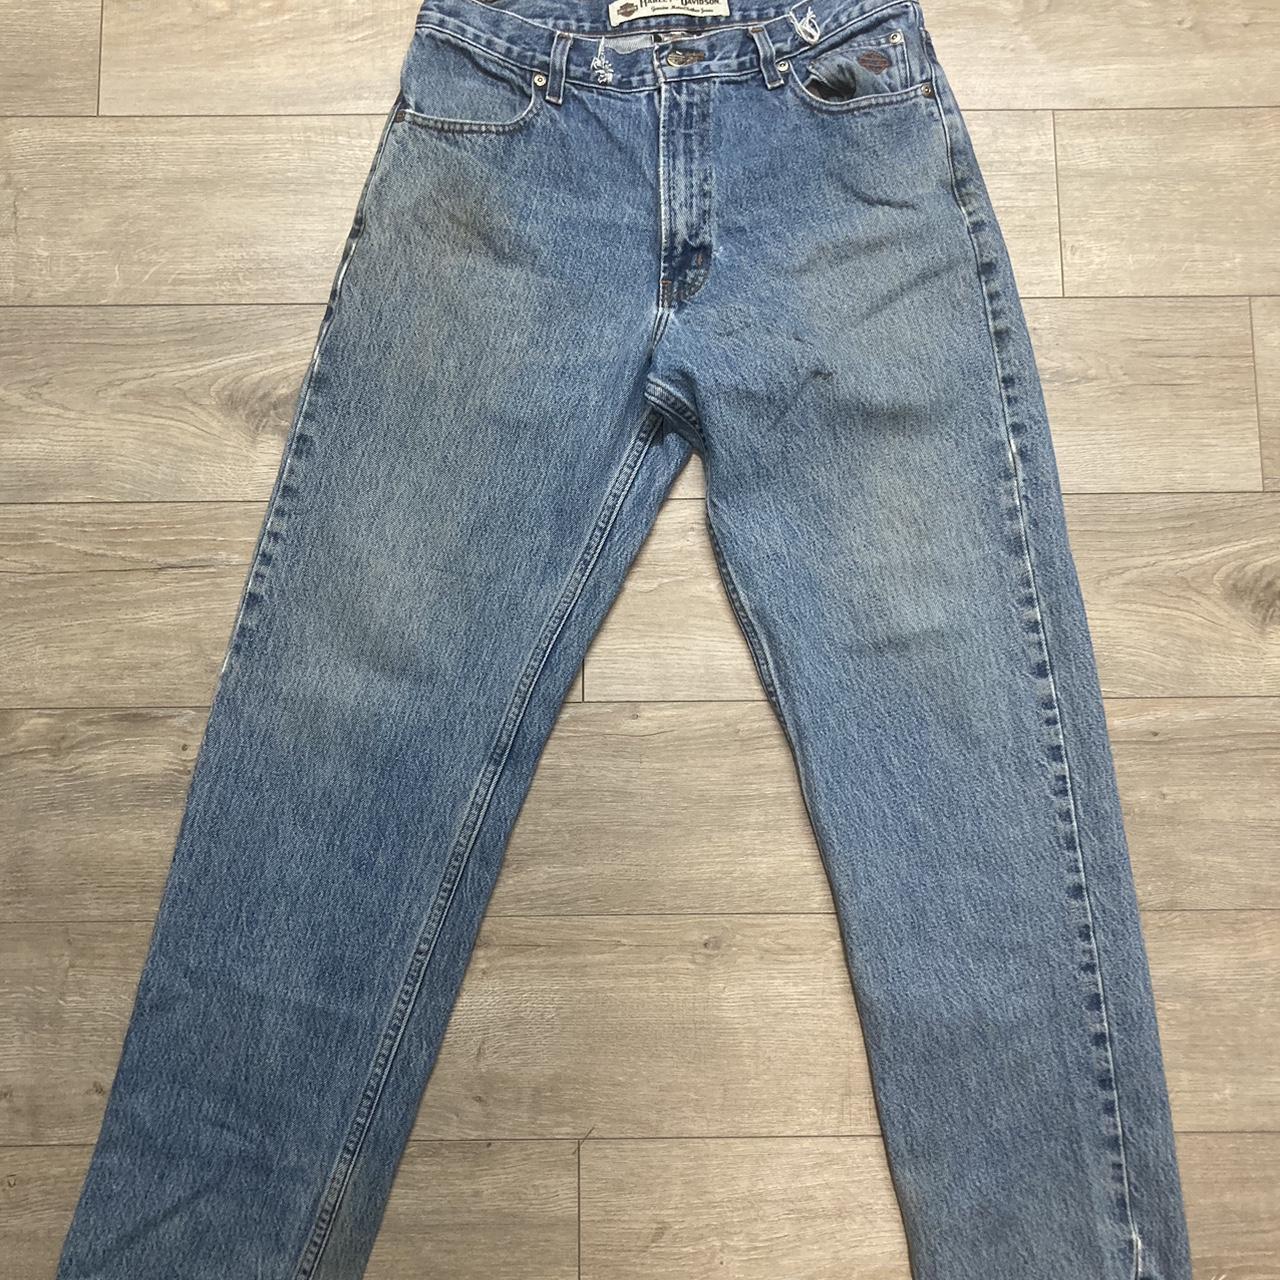 Harley Davidson jeans 32-32 Some rips and stains - Depop